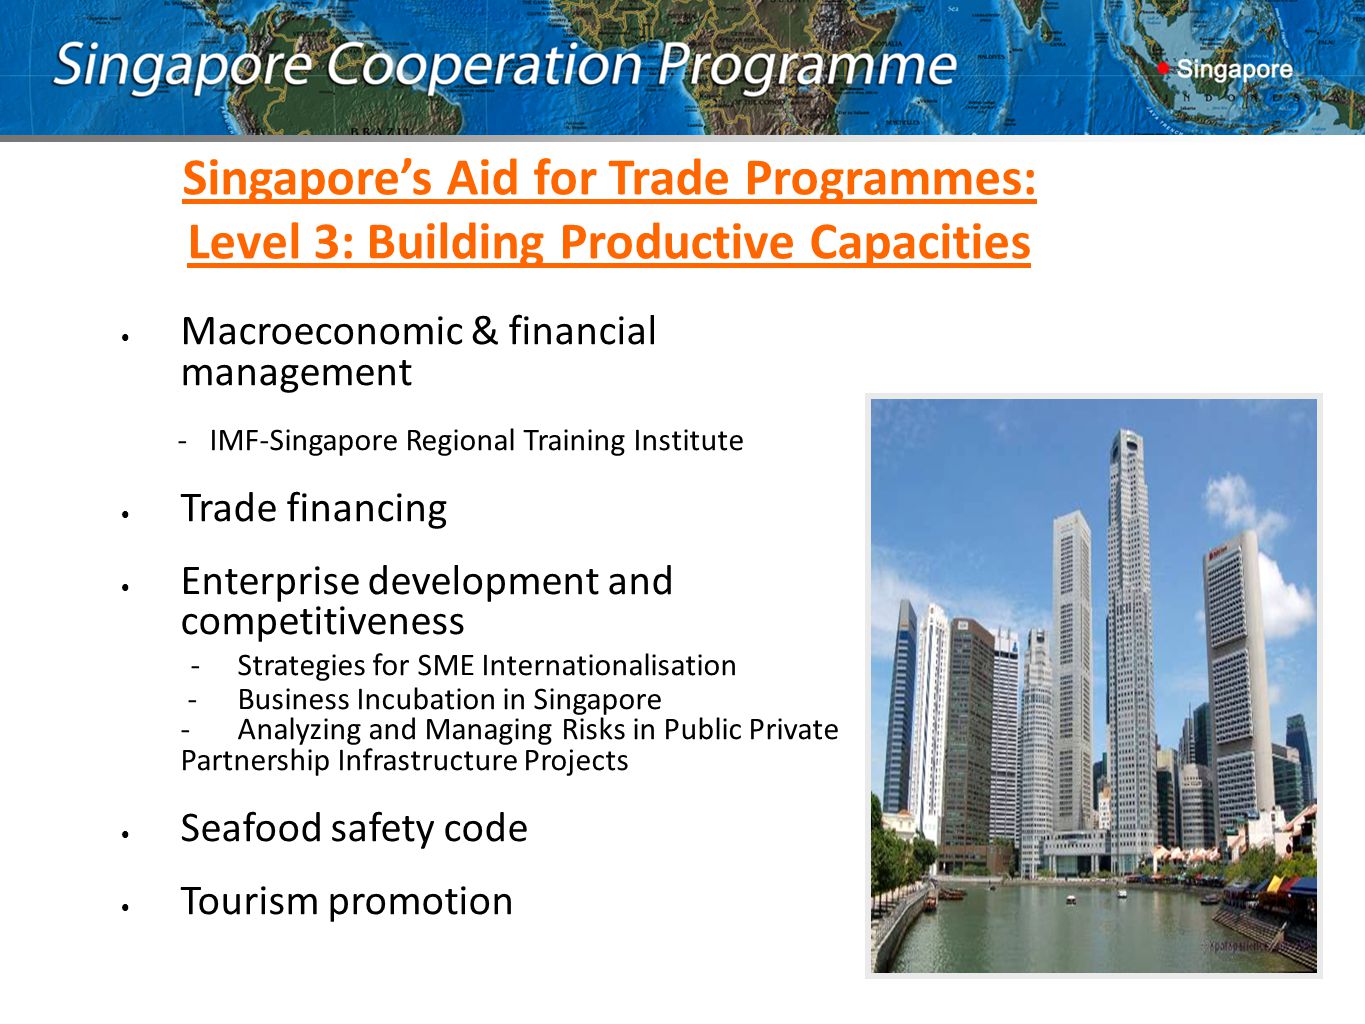 Macroeconomic & financial management - IMF-Singapore Regional Training Institute Trade financing Enterprise development and competitiveness -Strategies for SME Internationalisation - Business Incubation in Singapore - Analyzing and Managing Risks in Public Private Partnership Infrastructure Projects Seafood safety code Tourism promotion Singapore’s Aid for Trade Programmes: Level 3: Building Productive Capacities